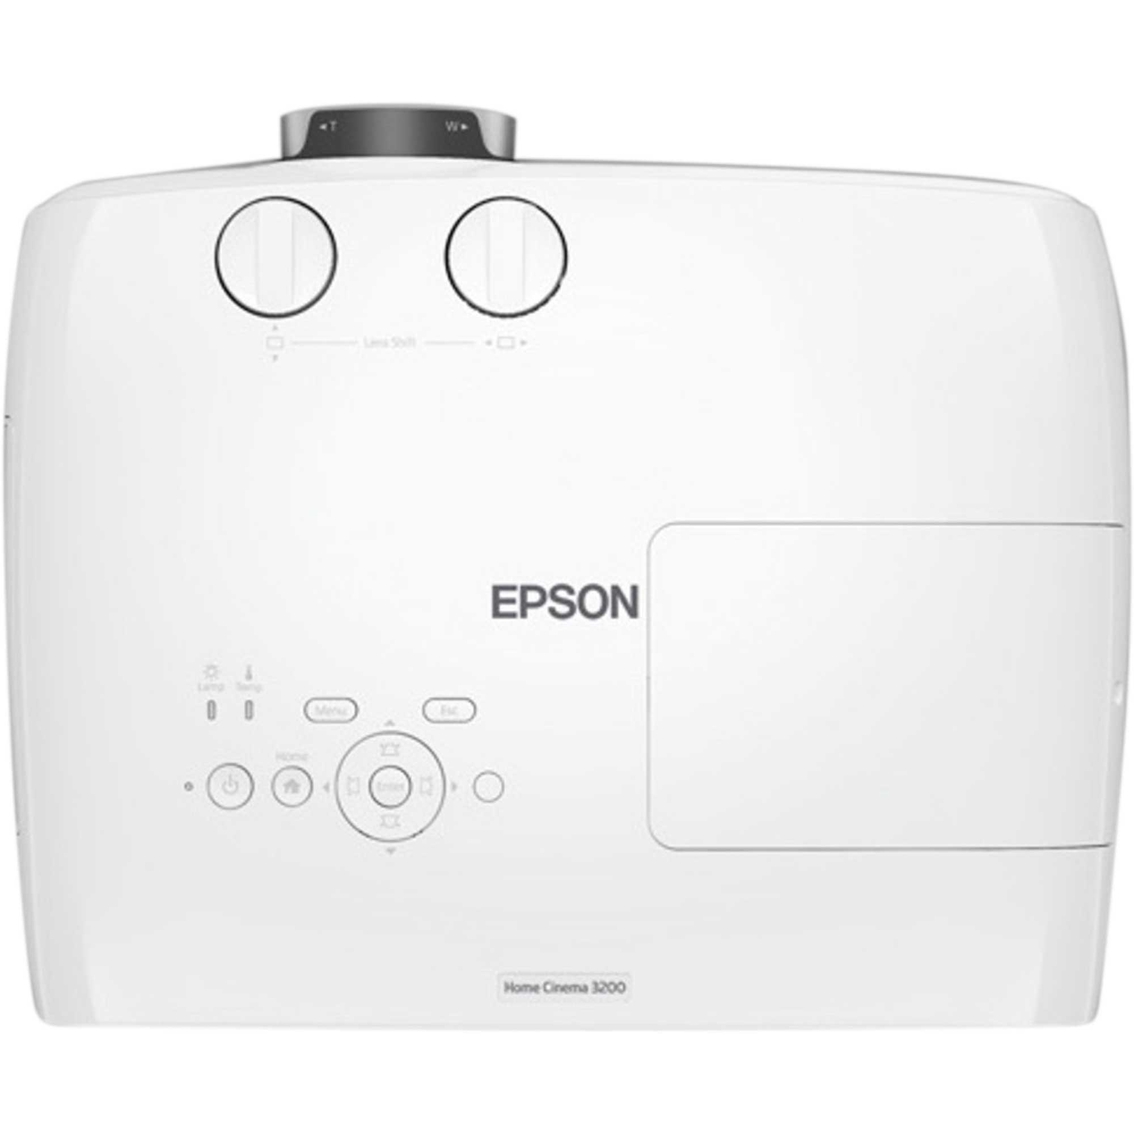 Epson Home Cinema 3200 4K PRO UHD 3-Chip Projector with HDR - Image 4 of 5